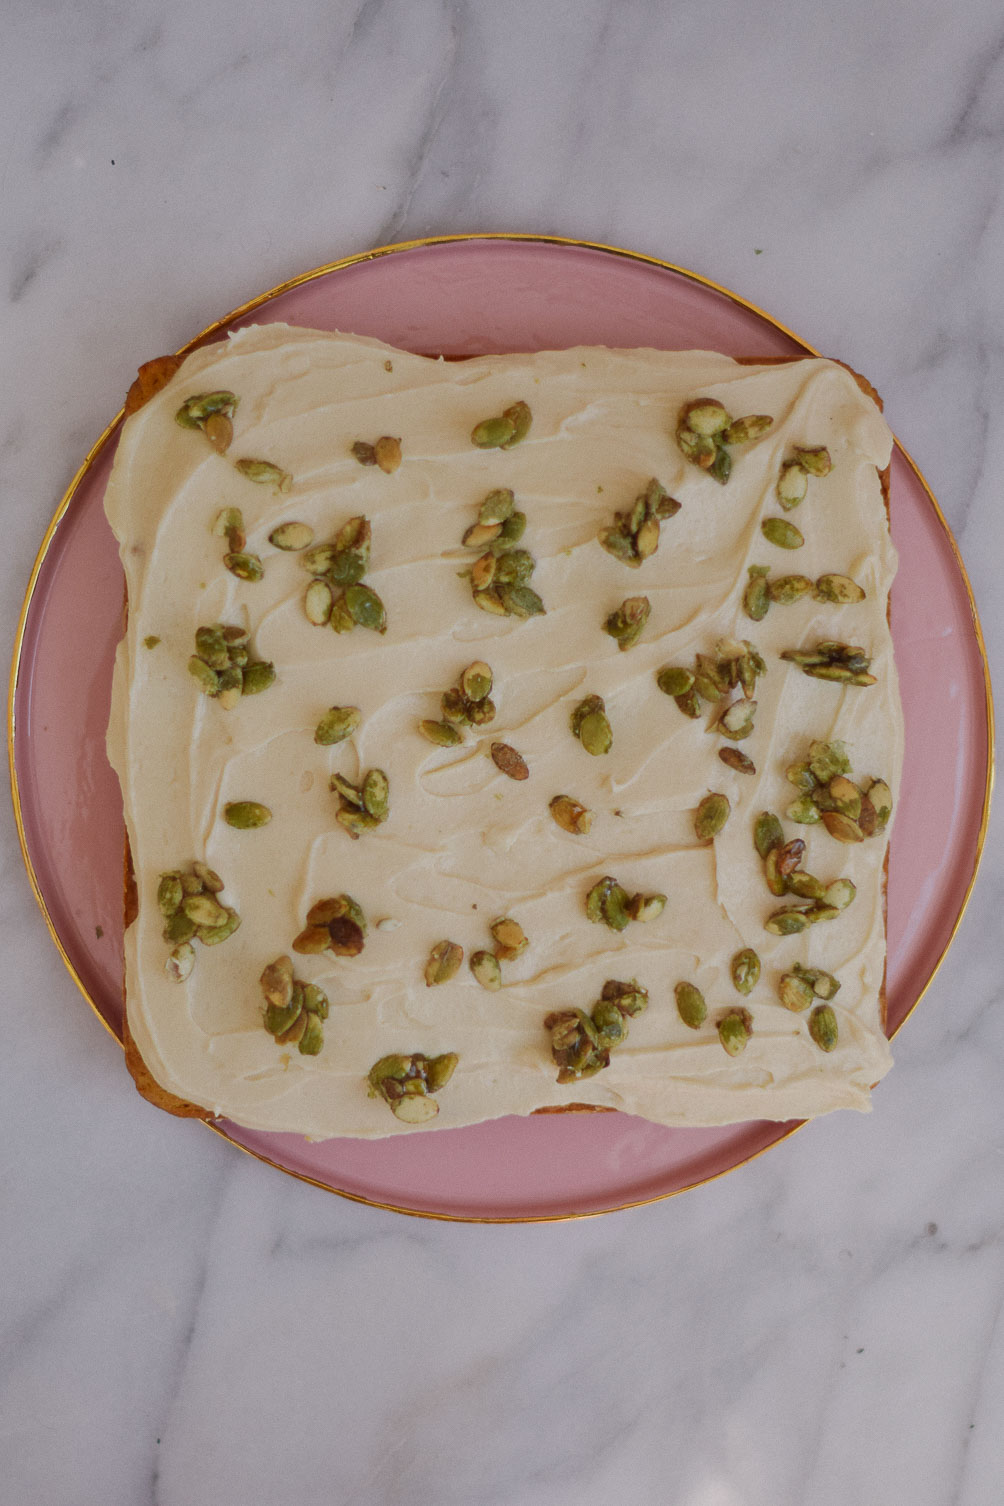 easy and delicious fall recipe ideas - sweet potato cake with candied pipits and cream cheese frosting on one brass fox